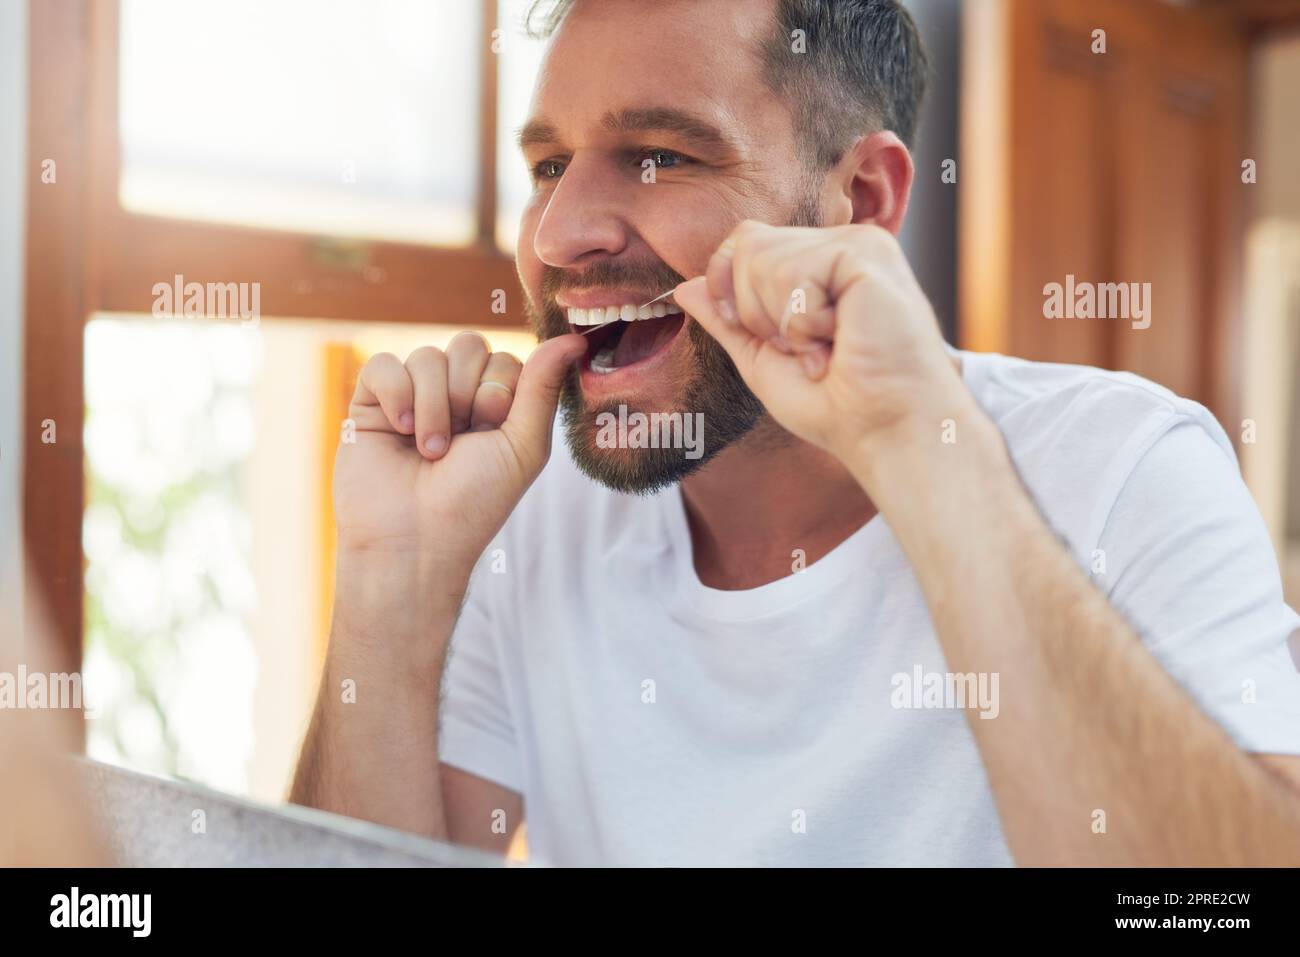 Take your dental hygiene routine a step further by flossing. a handsome young man flossing his teeth in the bathroom. Stock Photo